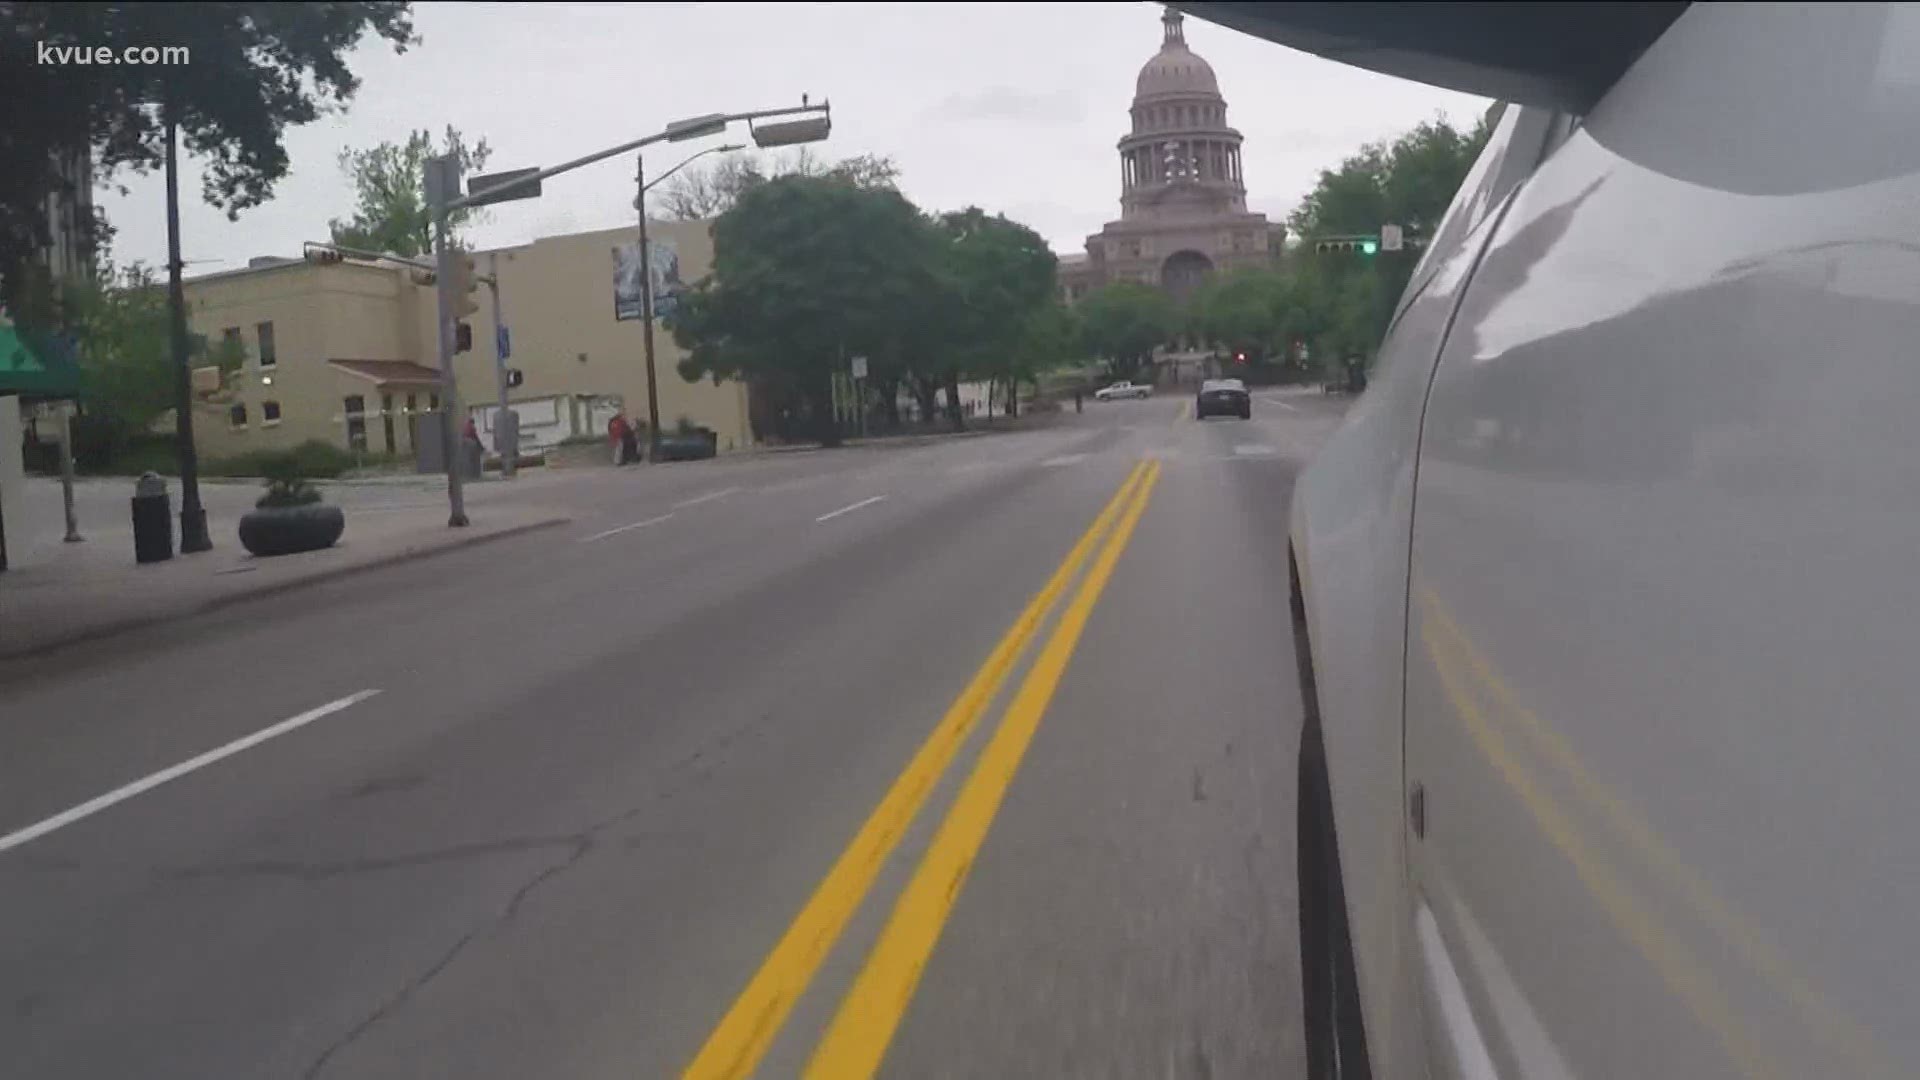 While some rides go smoothly, some Austin Uber drivers say other rides involve issues such as passengers taking off masks mid-ride and refusing to put them back on.